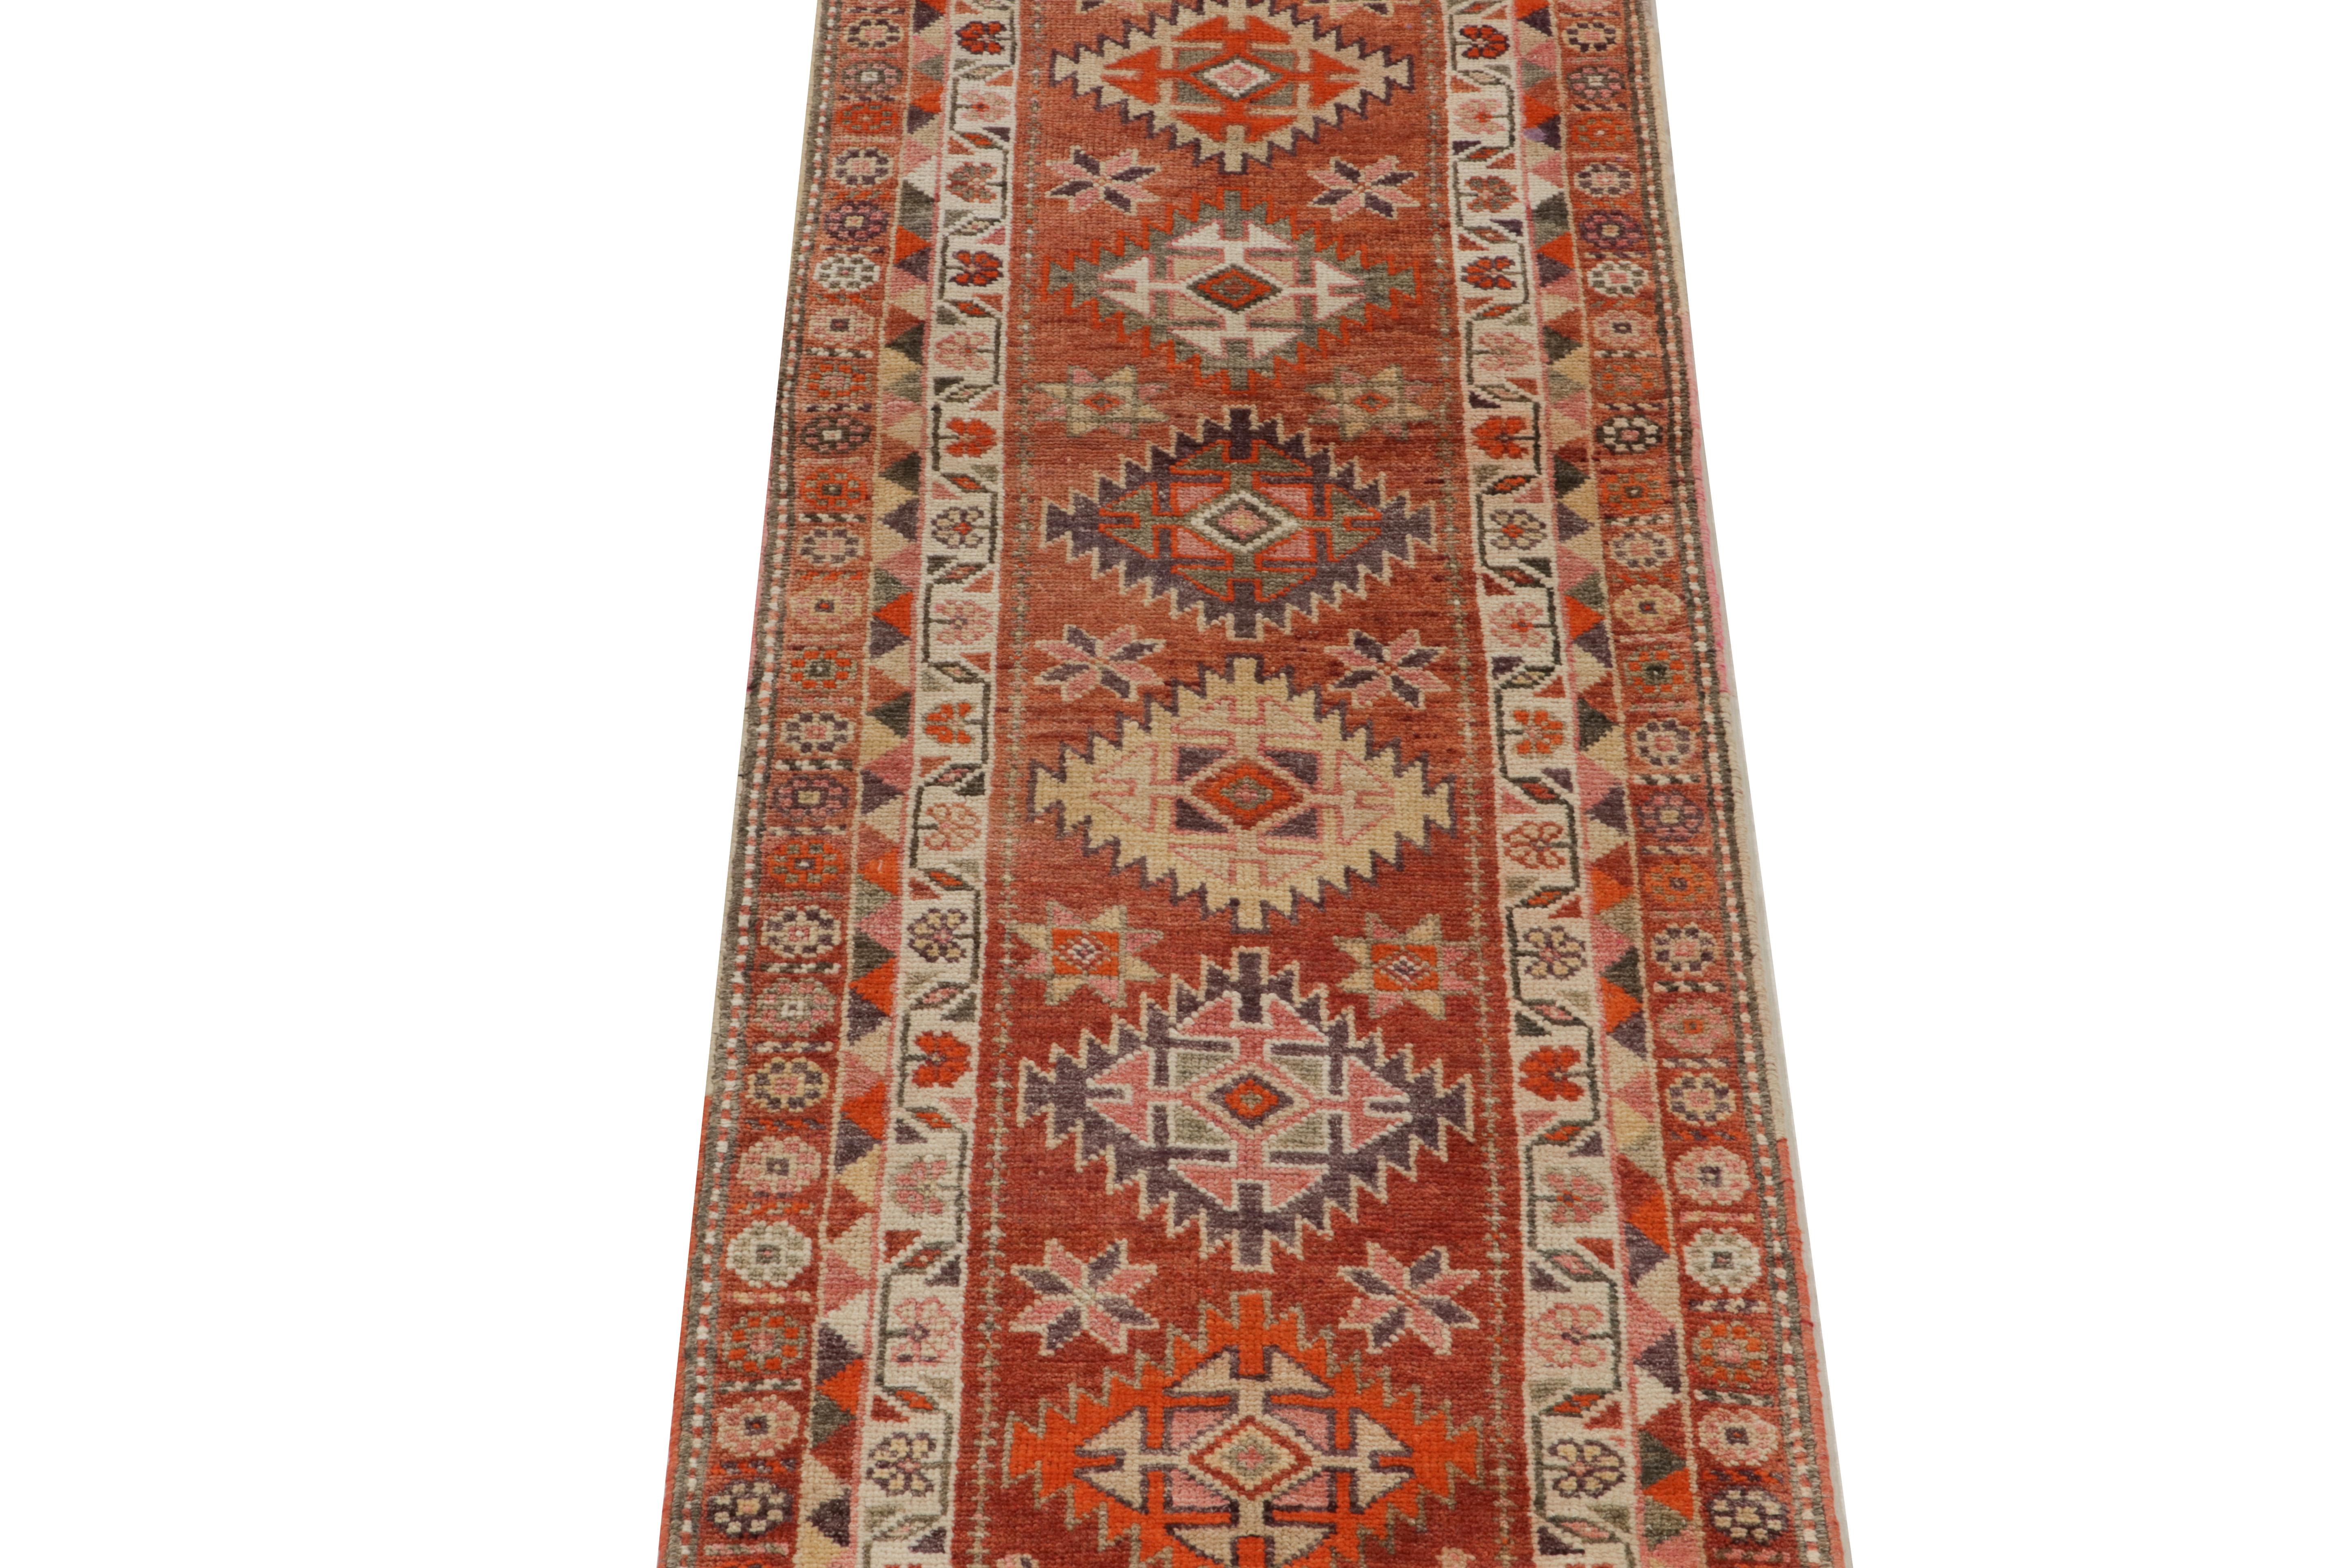 Hand-Knotted 1950s Vintage Tribal runner in Red, Orange and Beige-Brown Geometric Patterns For Sale